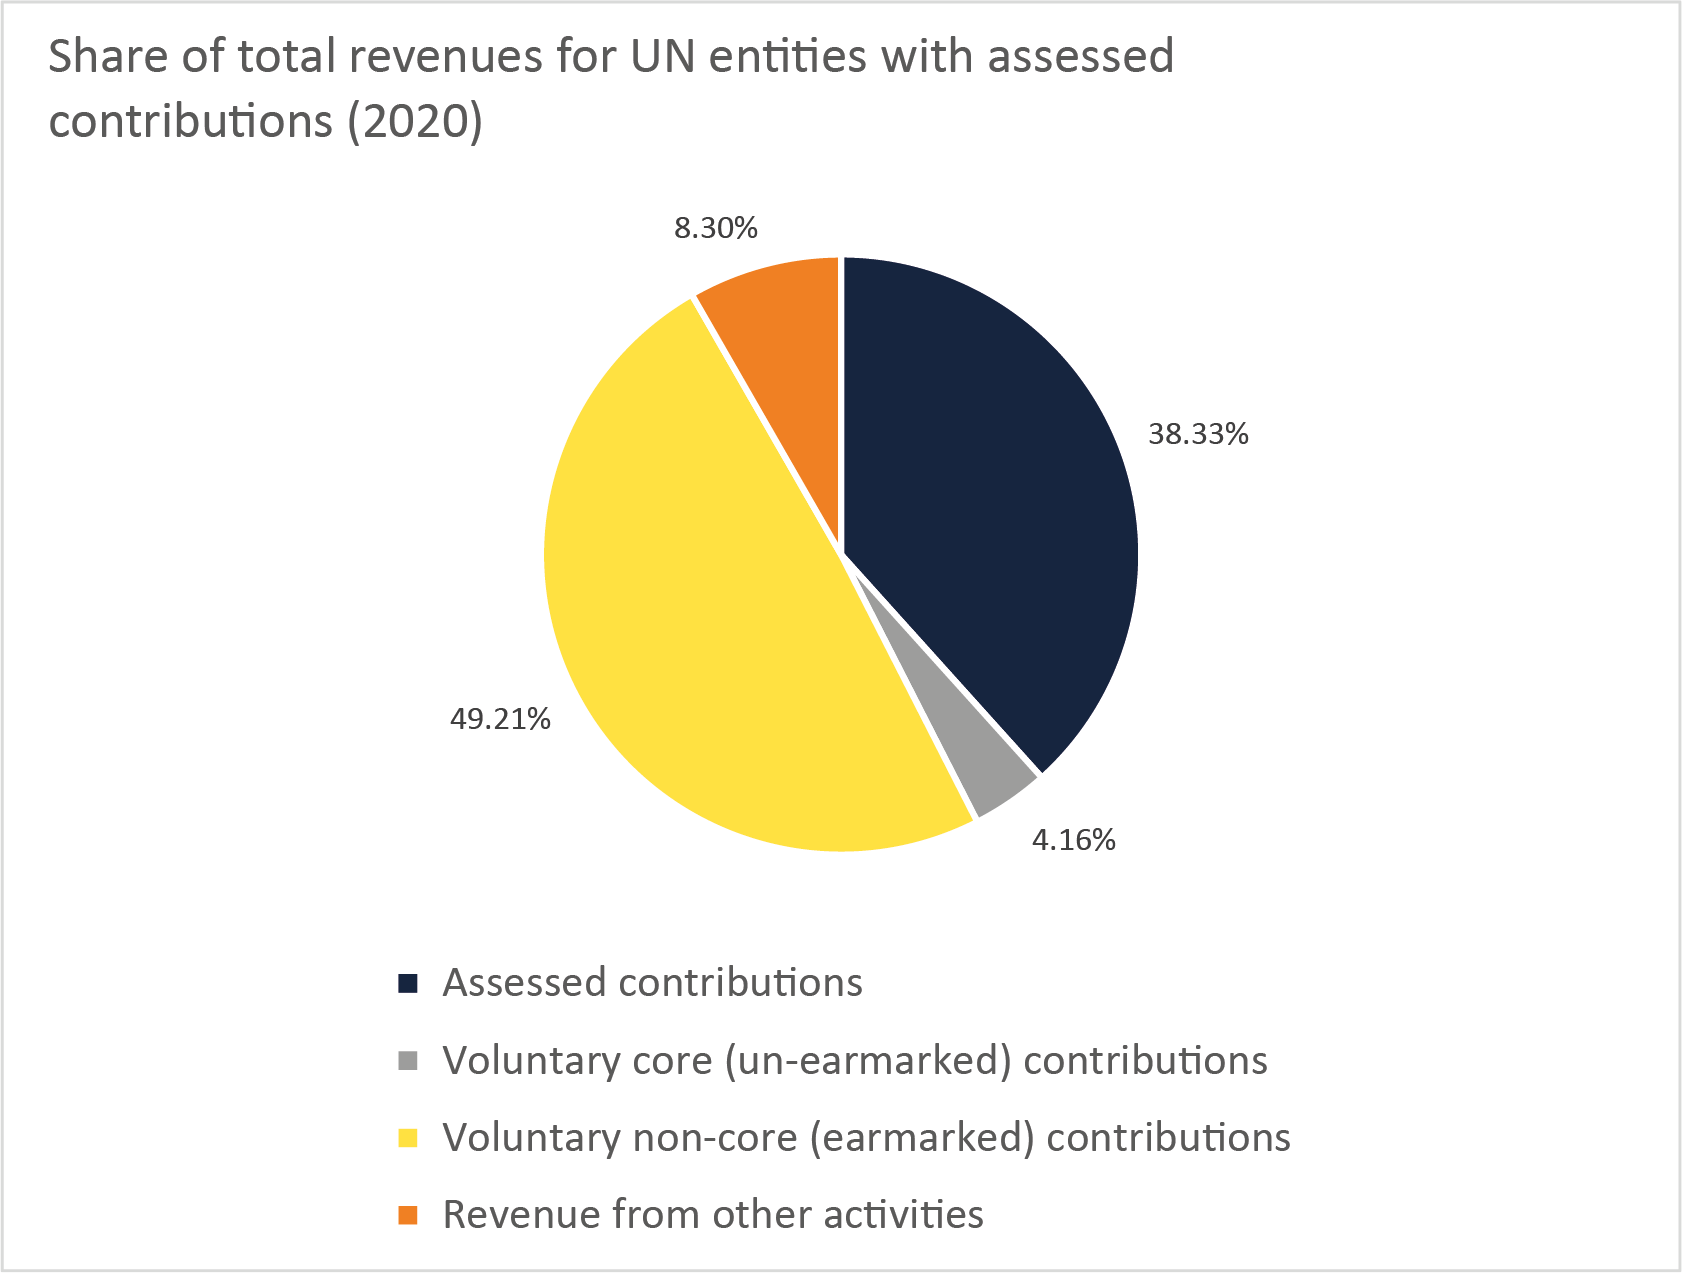 Composition of total revenues for UN entities receiving some assessed contributions (2020)